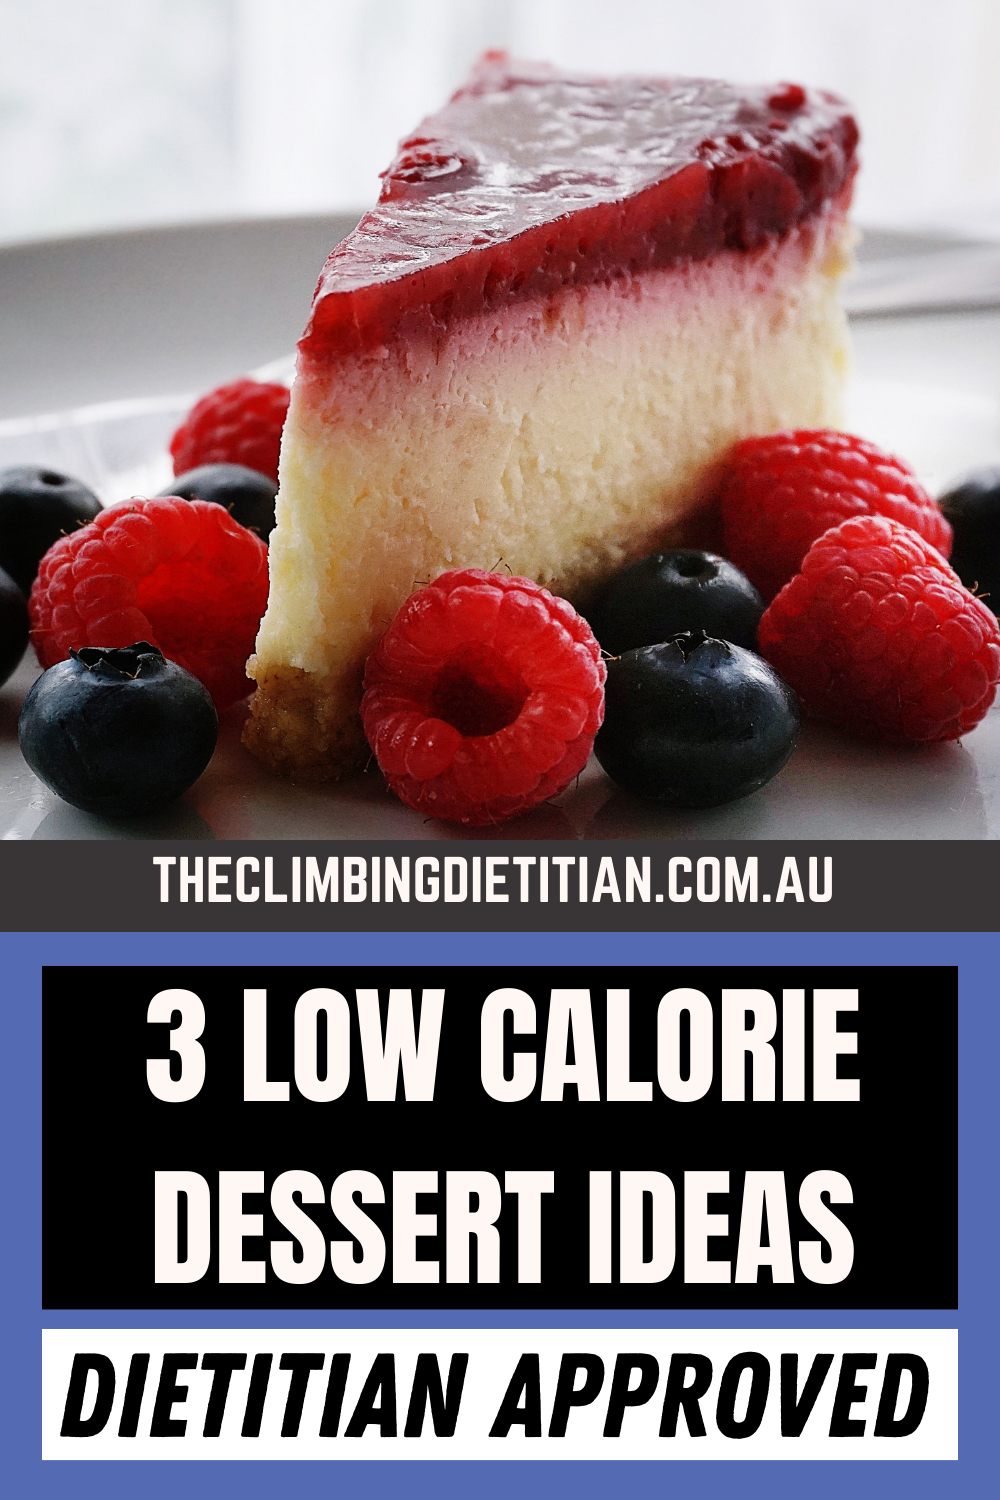 3 Low Calorie Dessert Alternatives (For More Effective Fat Loss)  Dietitian Approved Snack Ideas - Brisbane Dietitian and Nutritionist